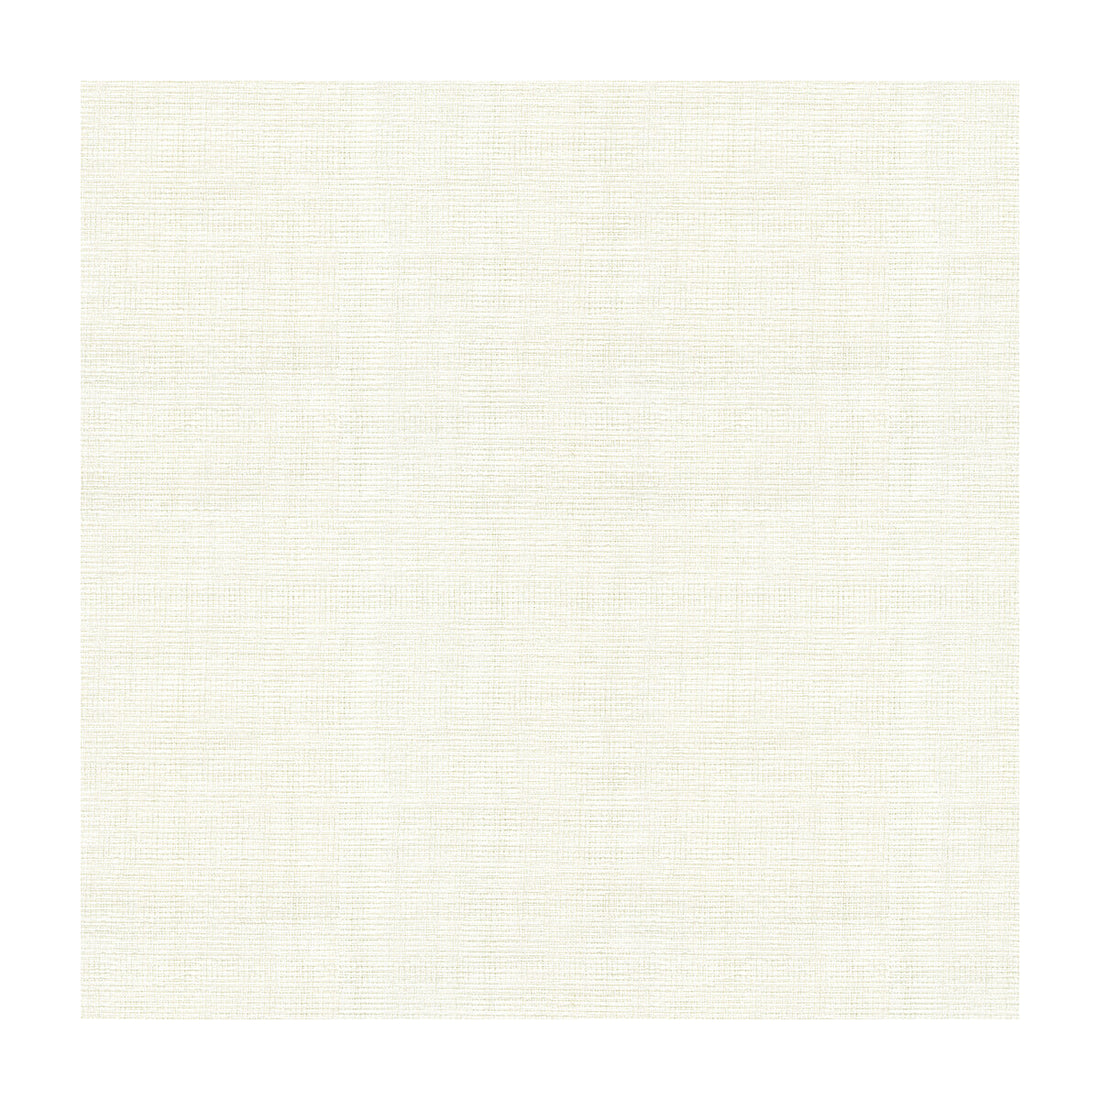 Kravet Contract fabric in 4164-101 color - pattern 4164.101.0 - by Kravet Contract